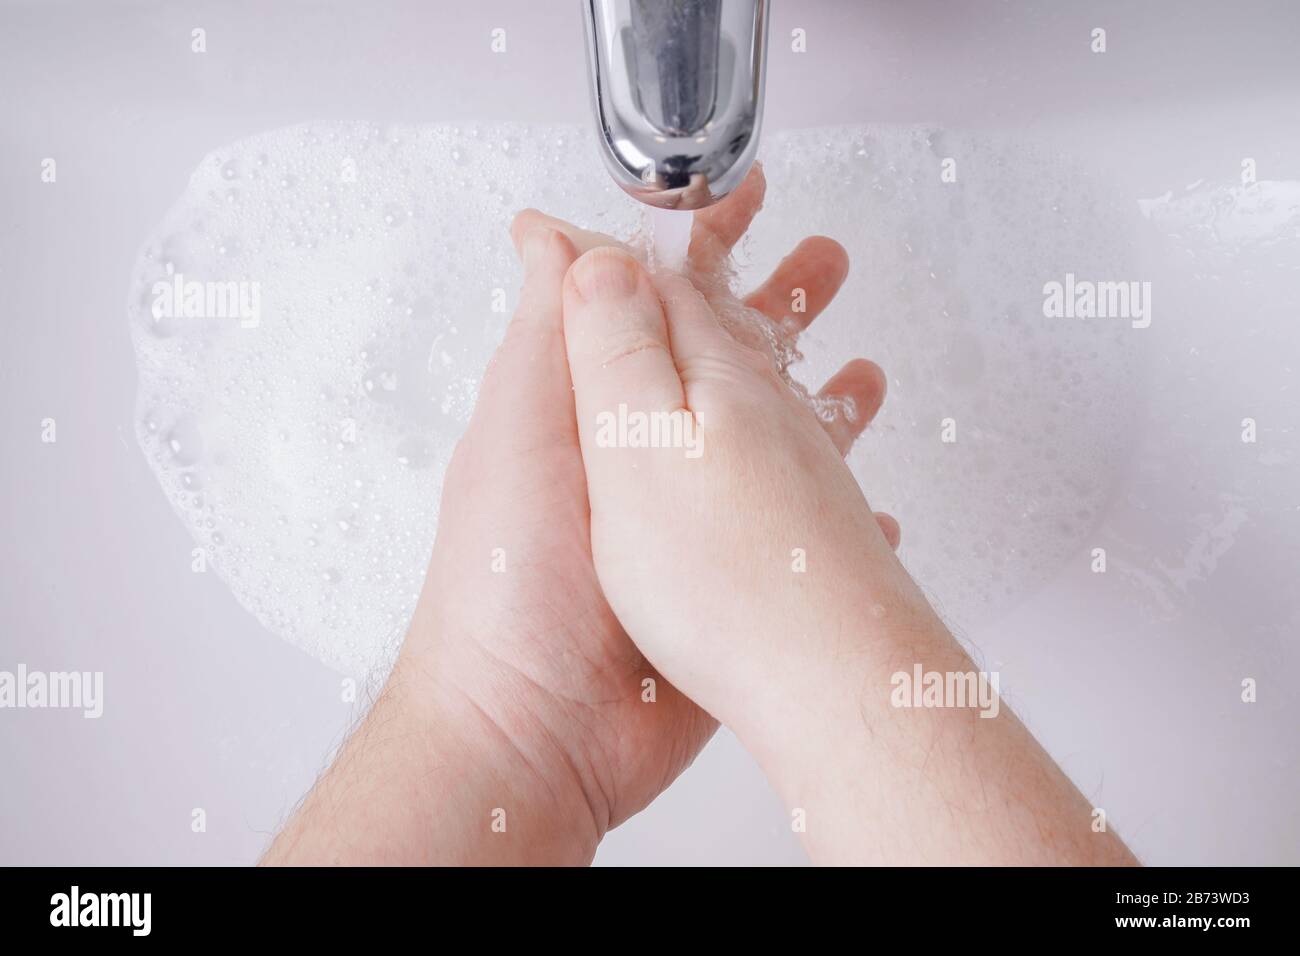 washing hands with soap and water from personal perspective - hygiene concept with unrecognizable male person and shallow depth of field Stock Photo